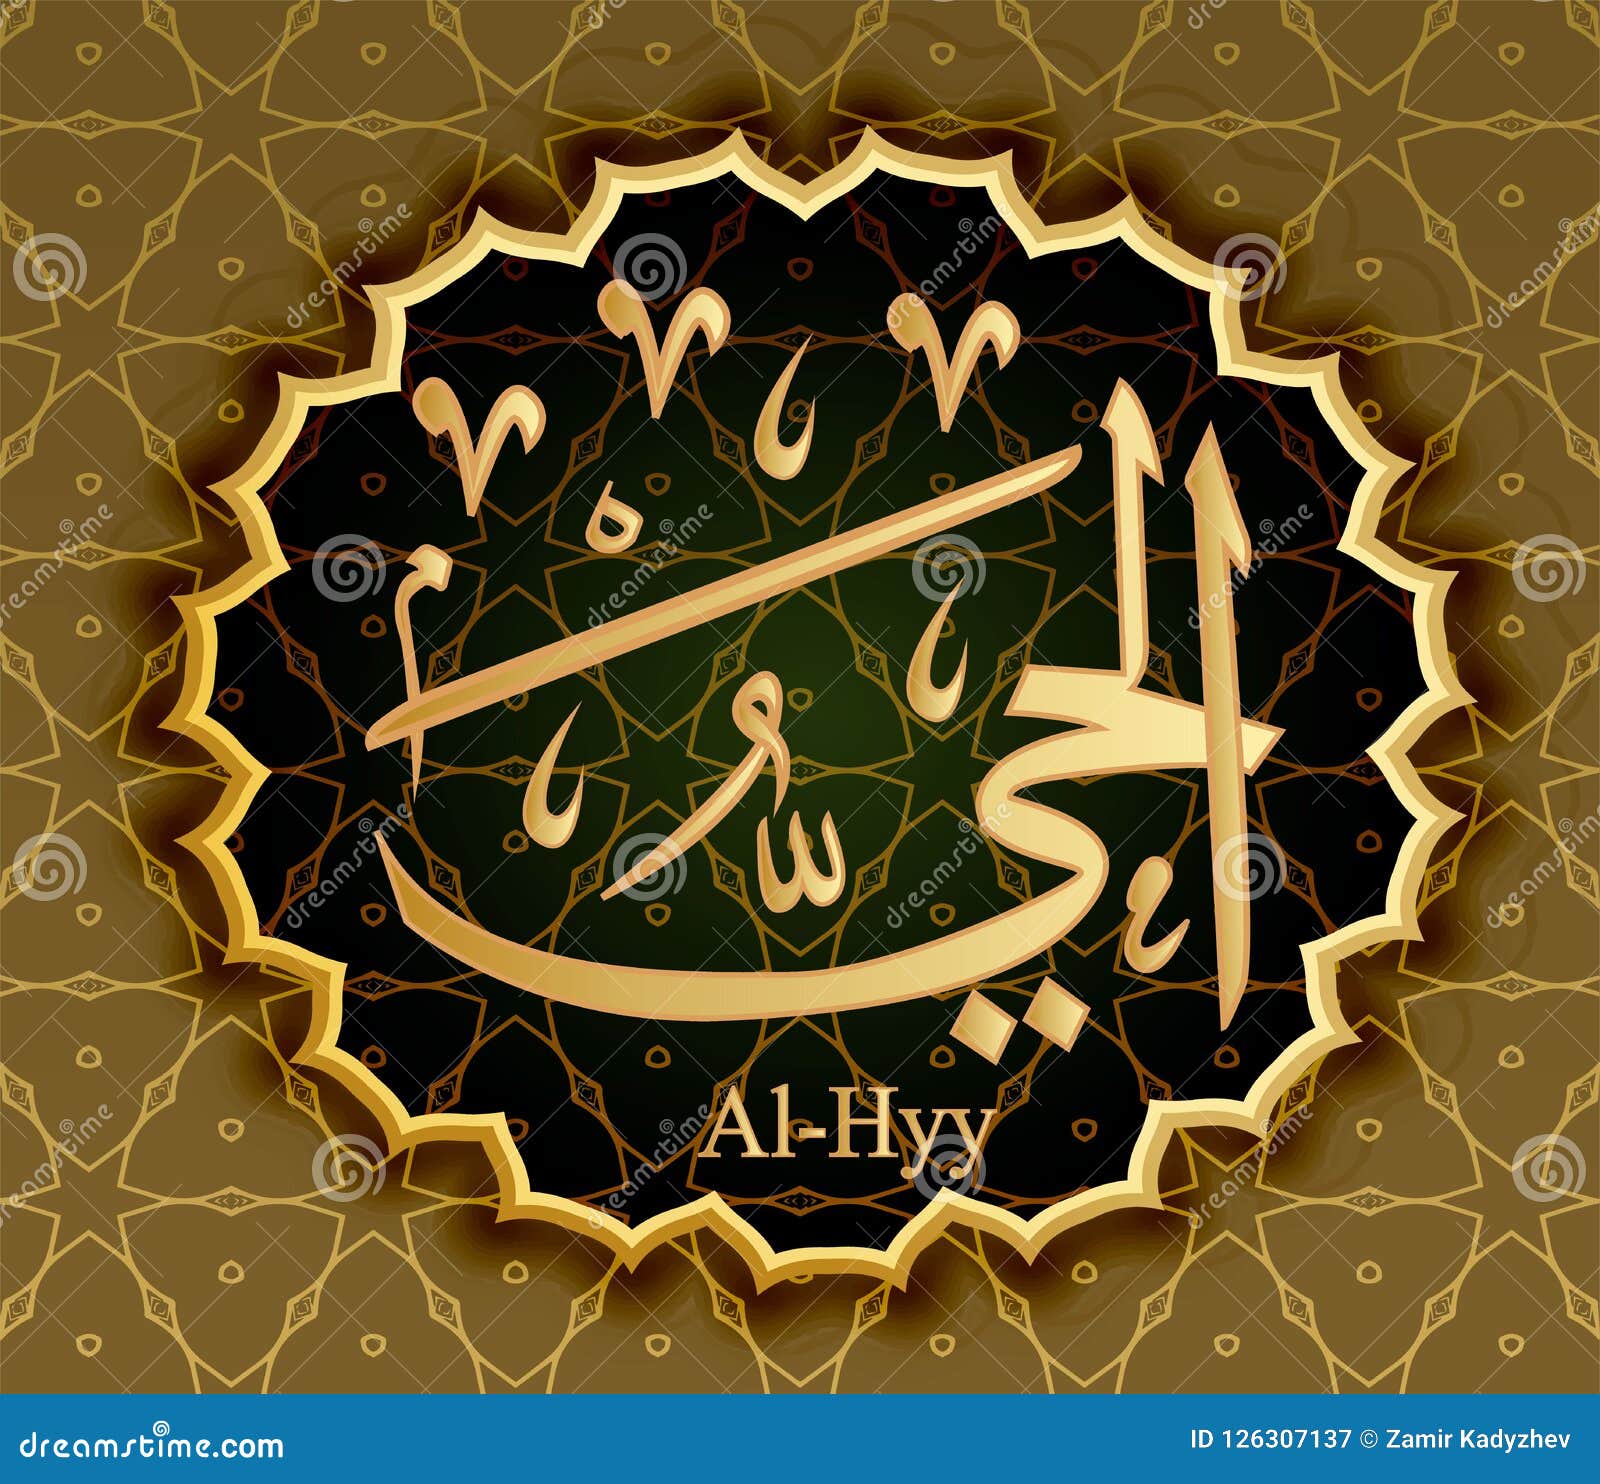 the name of allah al-haya means alive.